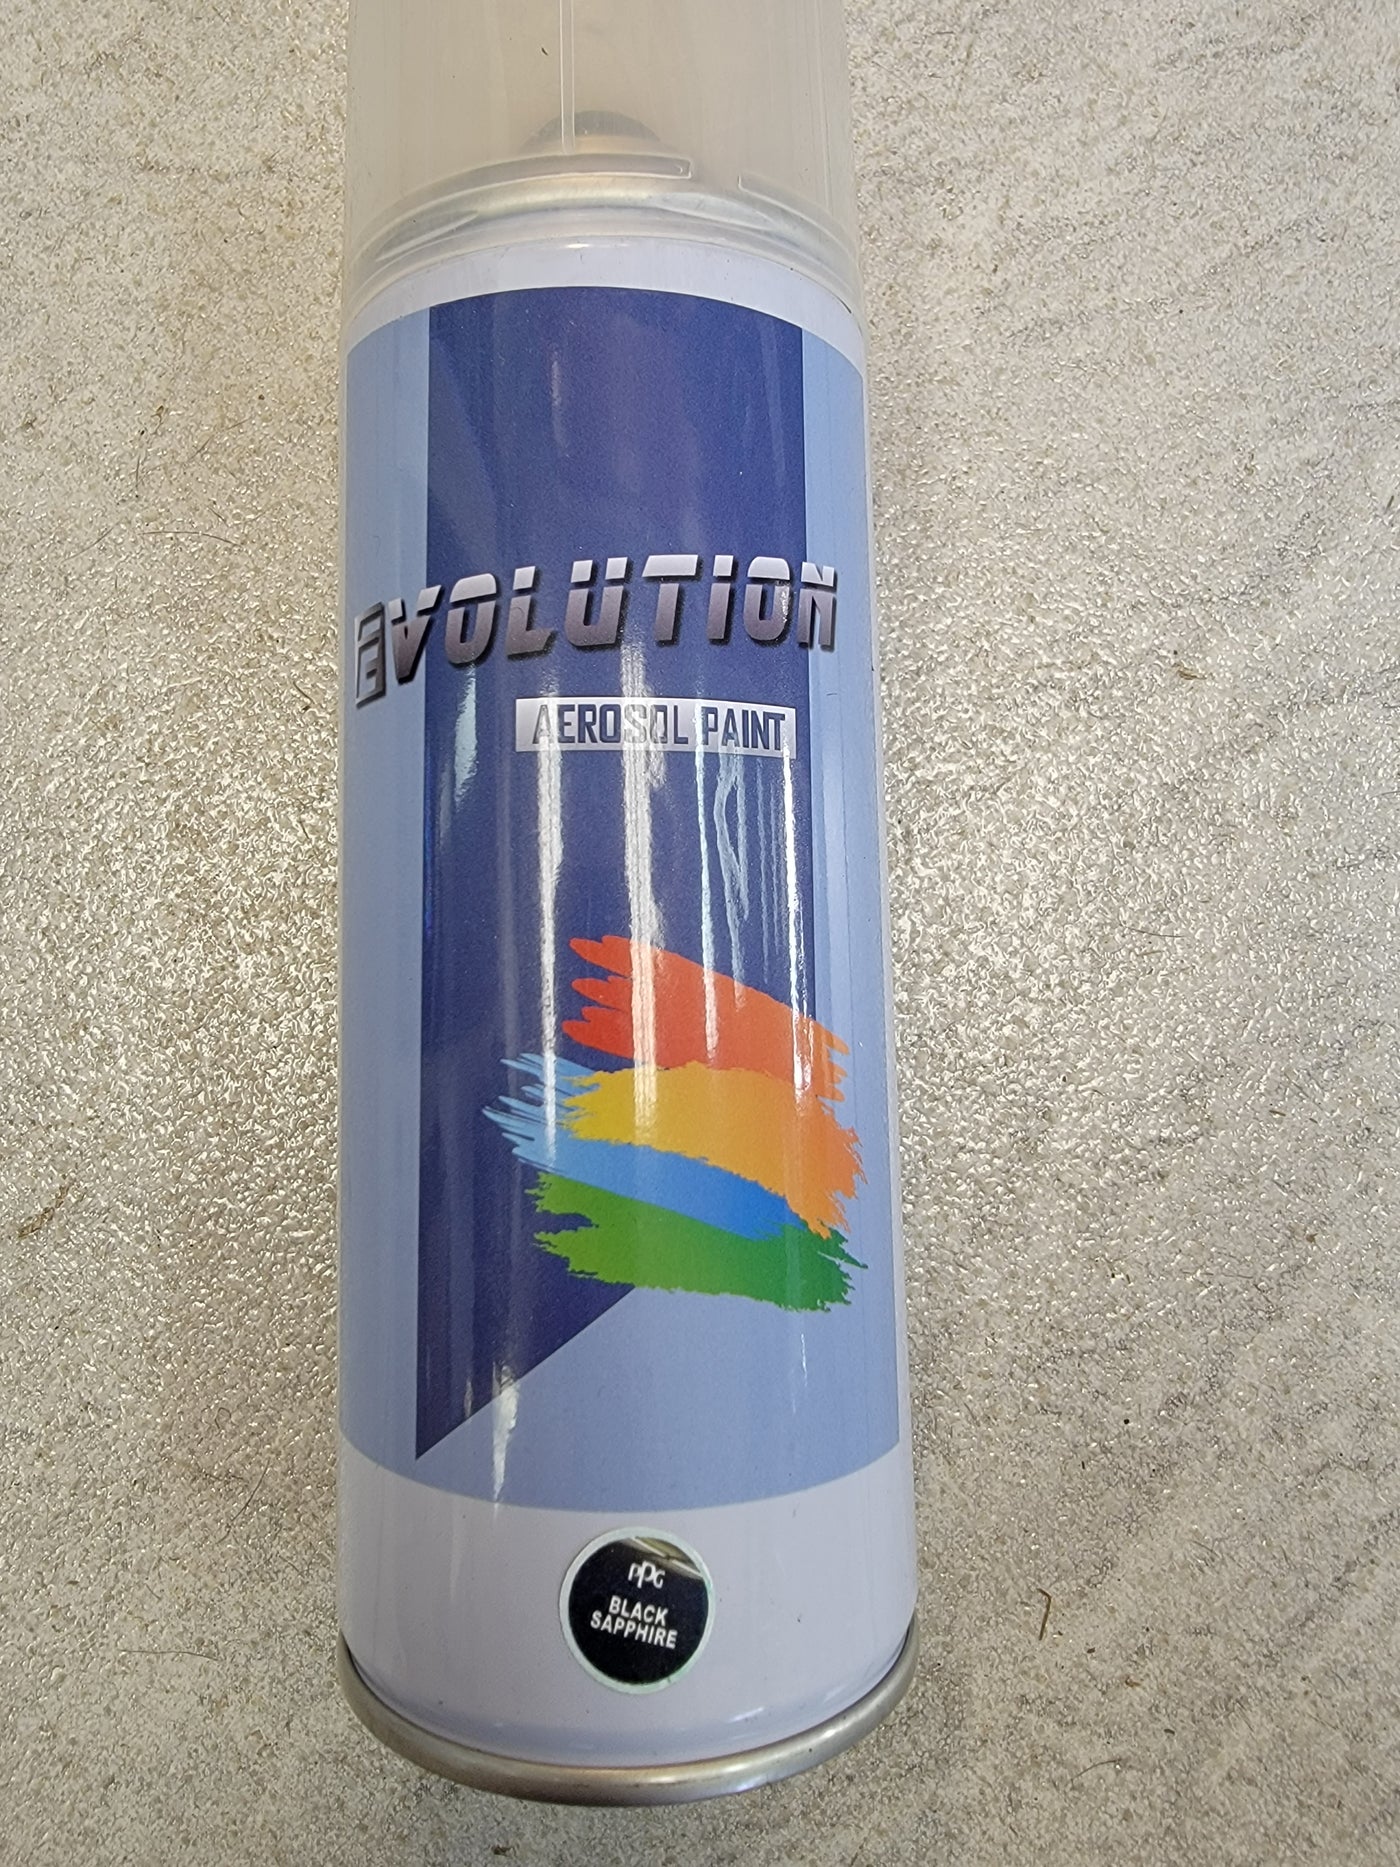 Evolution Golf Cart PPG Touch Up Paint Cans